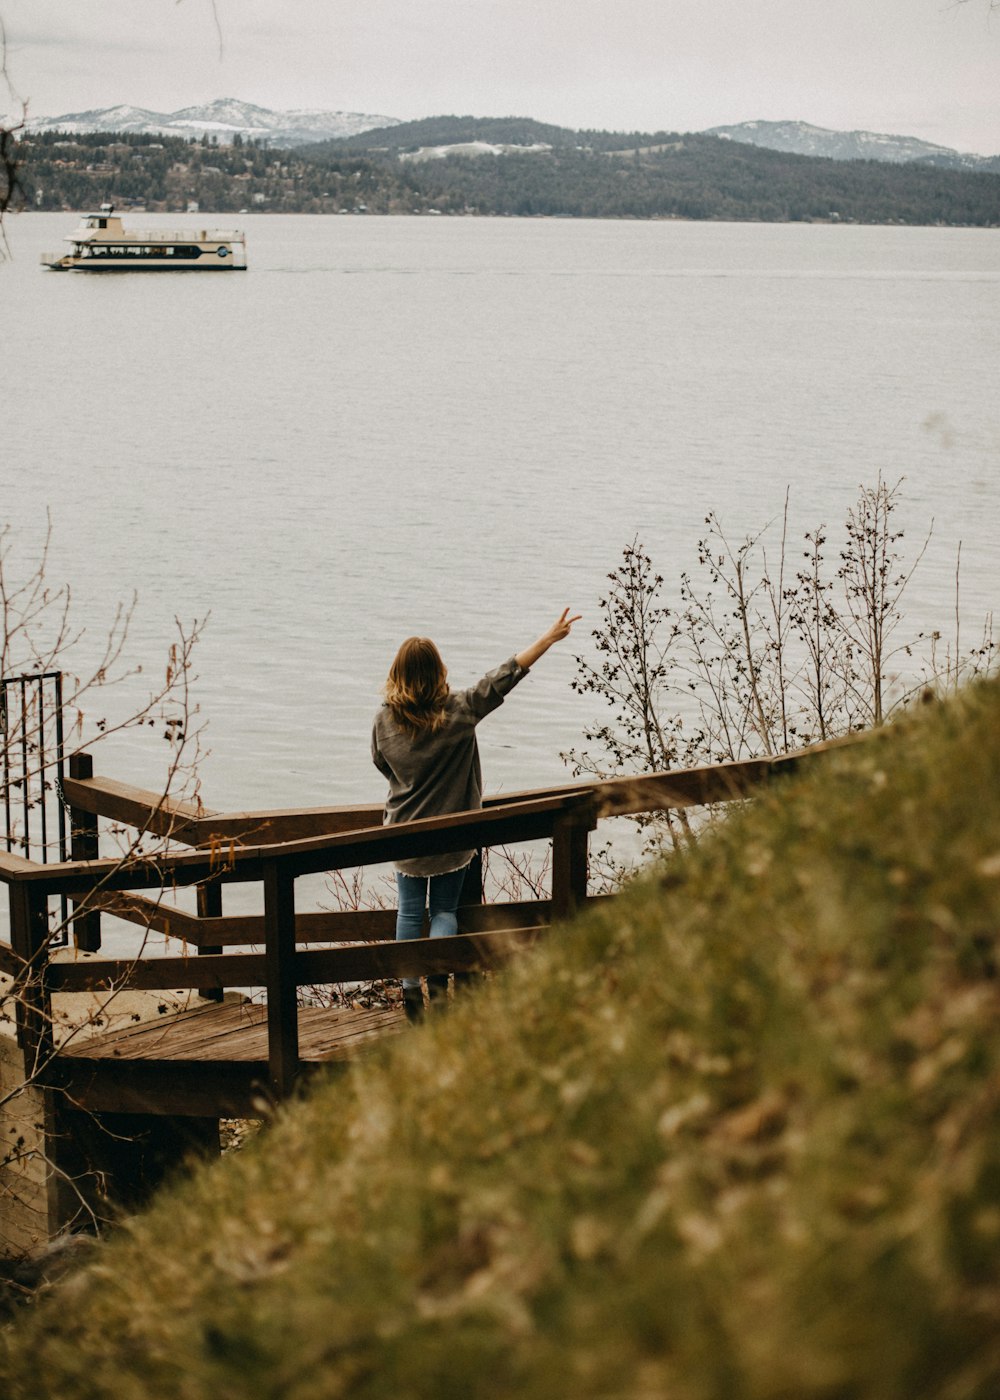 a person standing on a wooden bench near a body of water